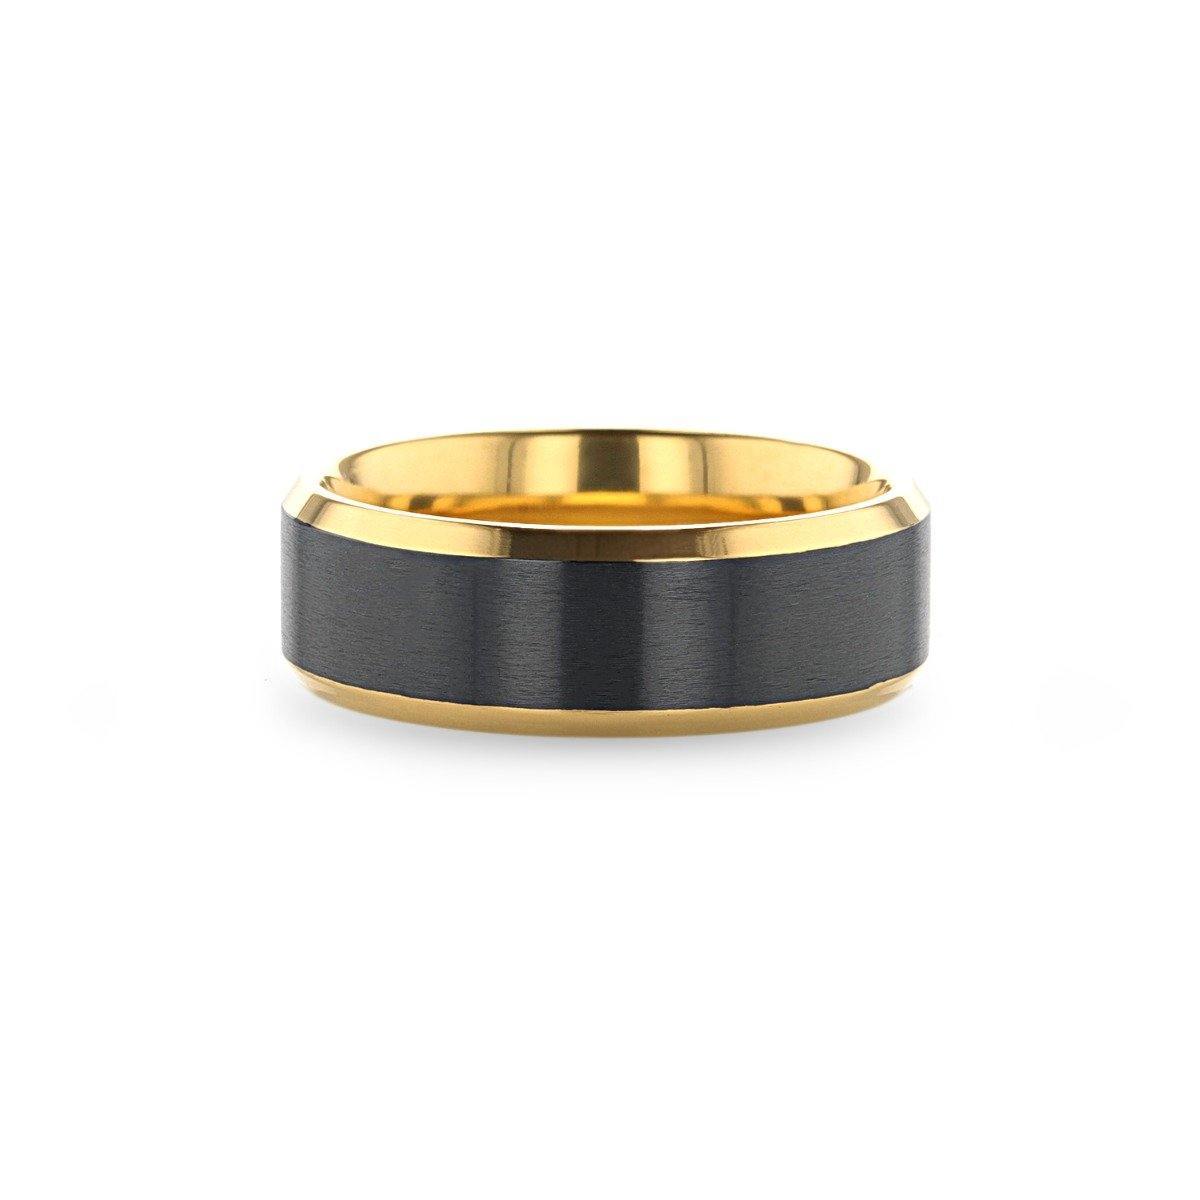 BEAUMONT - Gold Plated Titanium Polished Beveled Ring with Brushed Black Center - 8mm - The Rutile Ltd